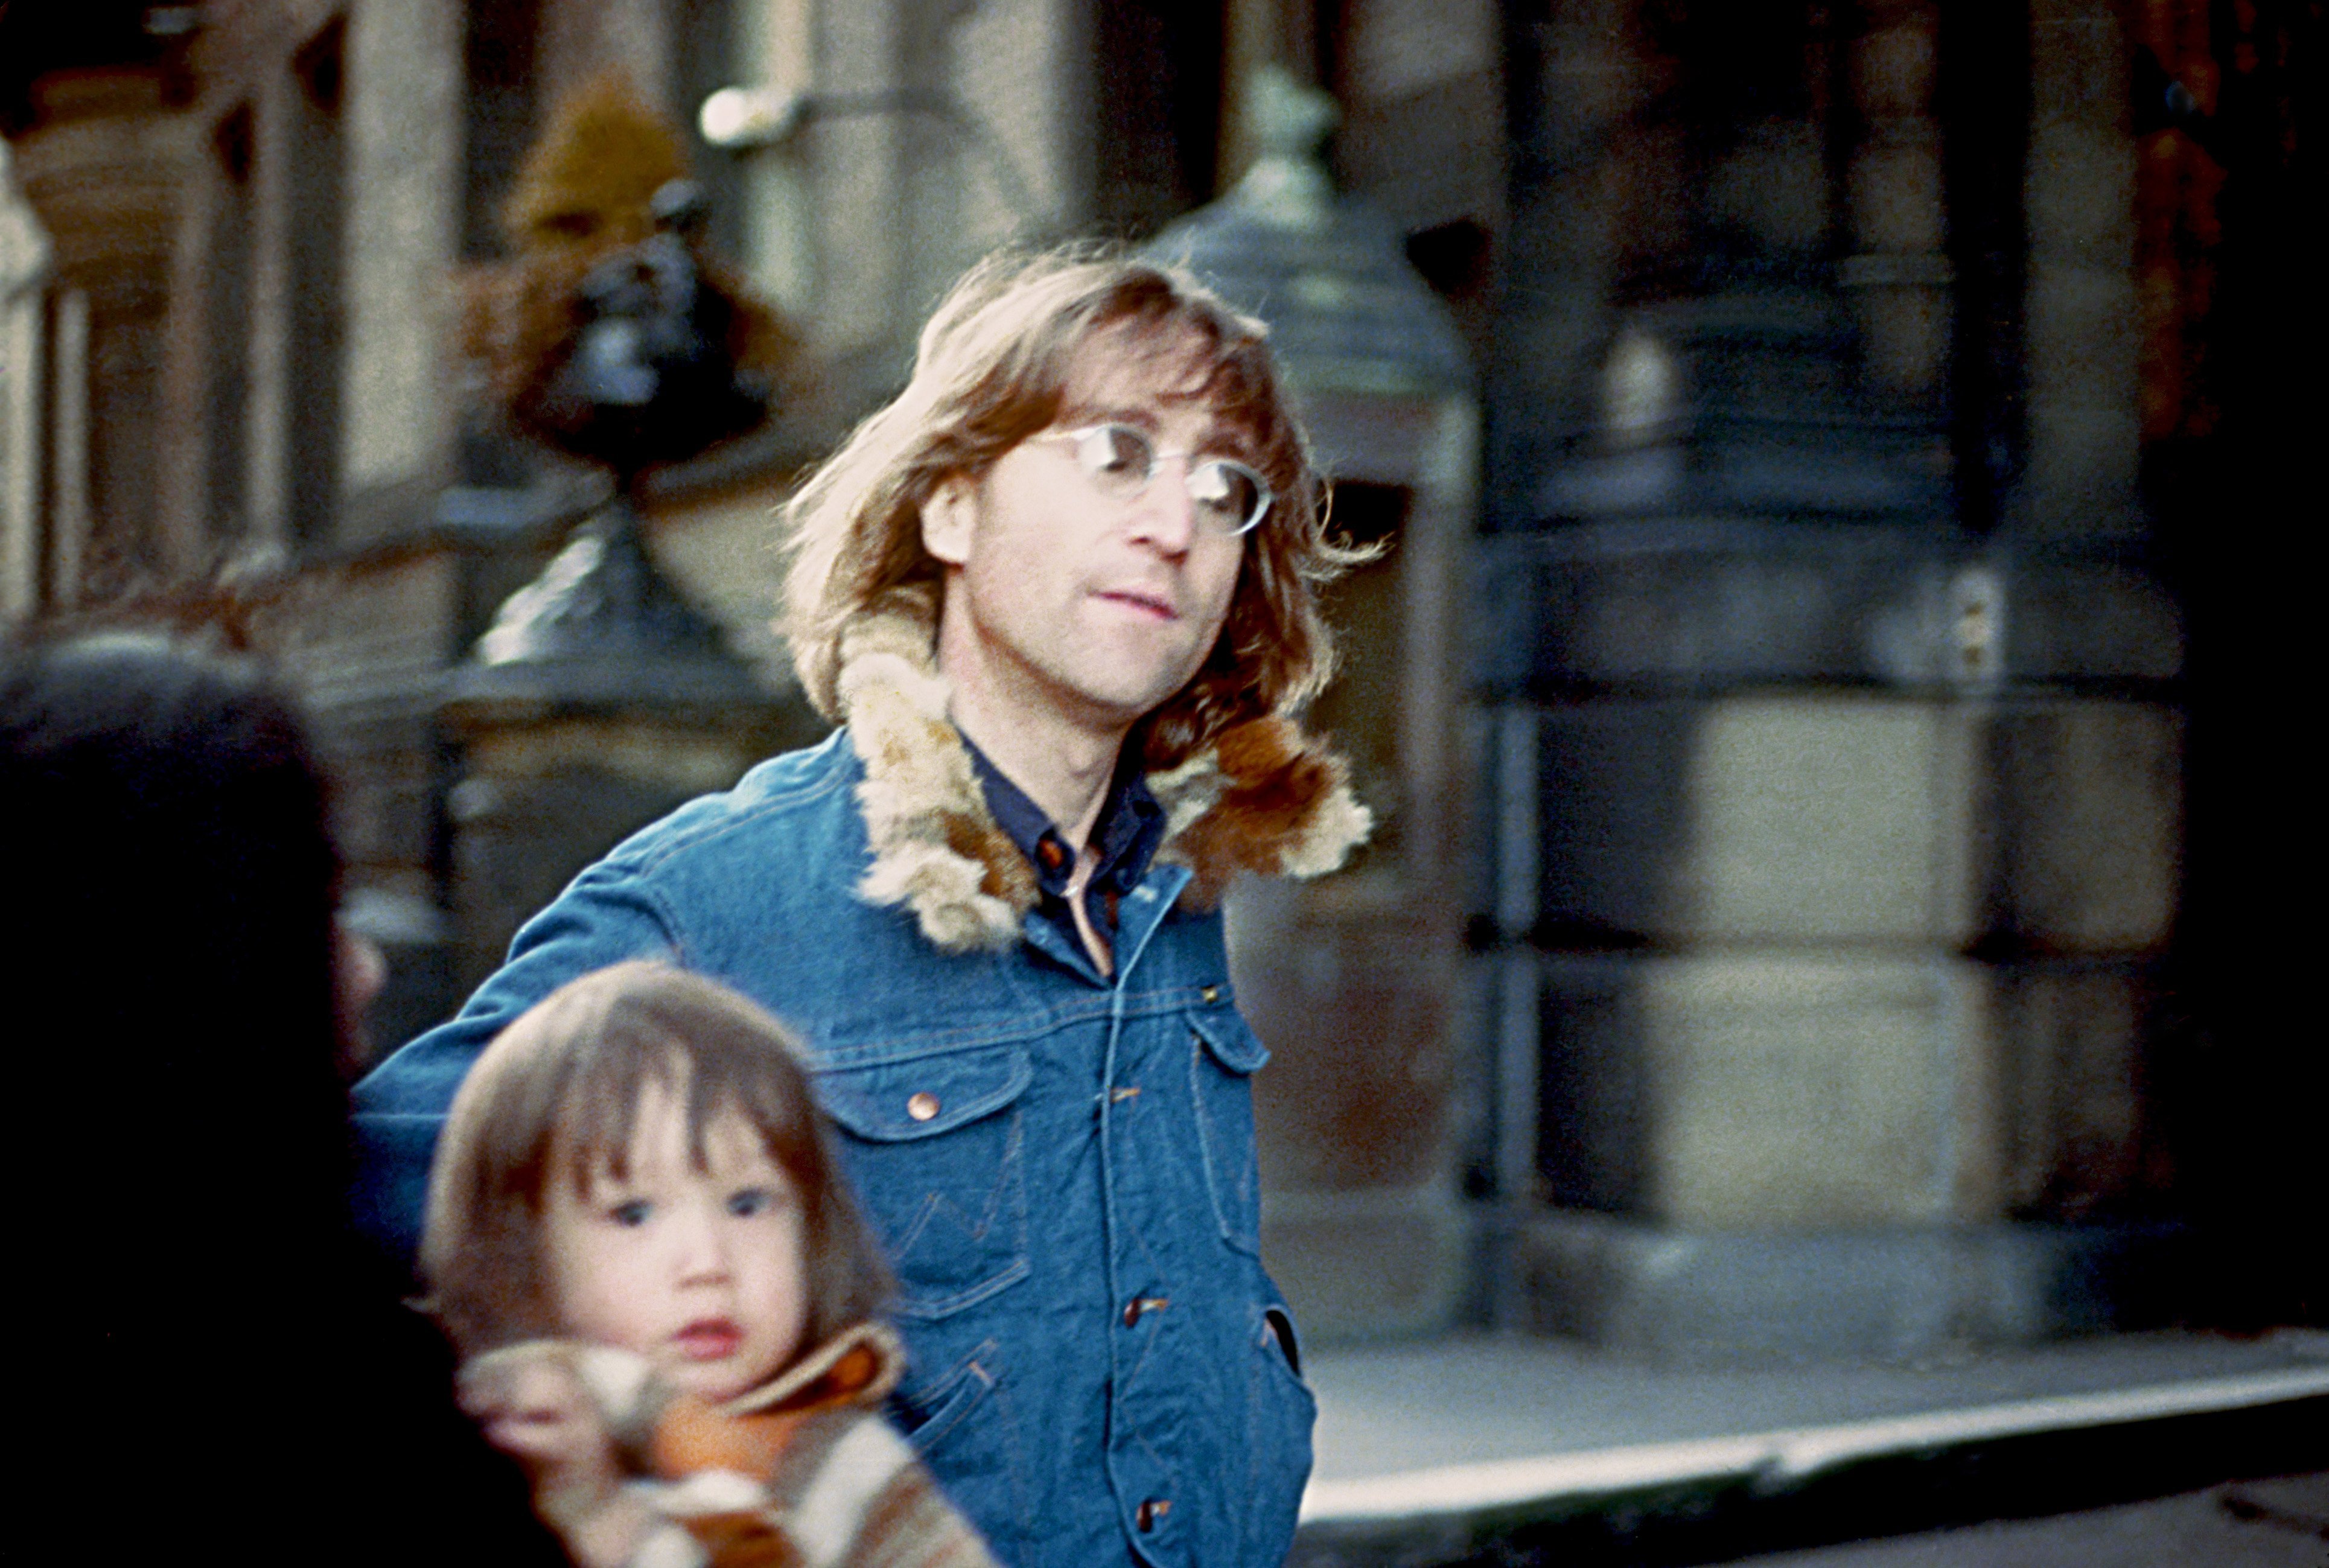 John Lennon (right) and his son, Sean in 1977